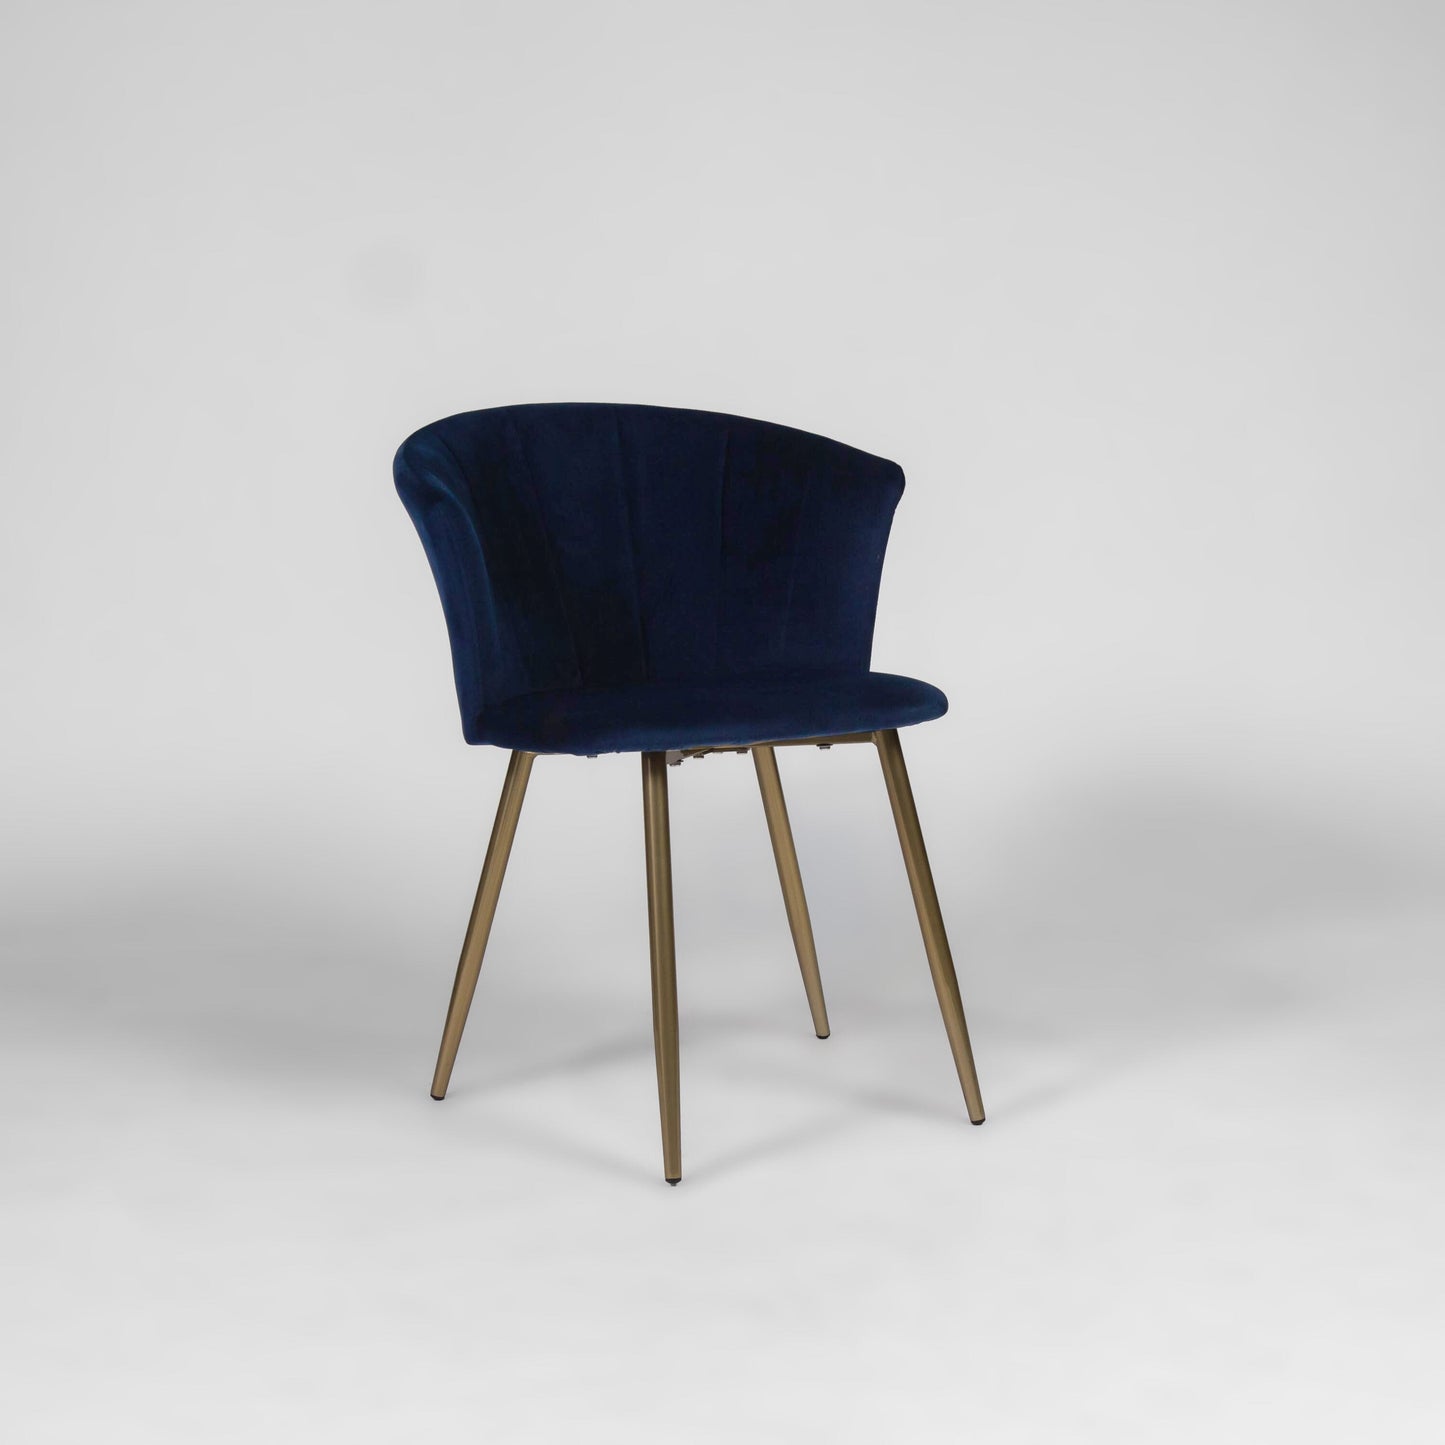 Cleo dining chairs - set of 2 - blue and gold